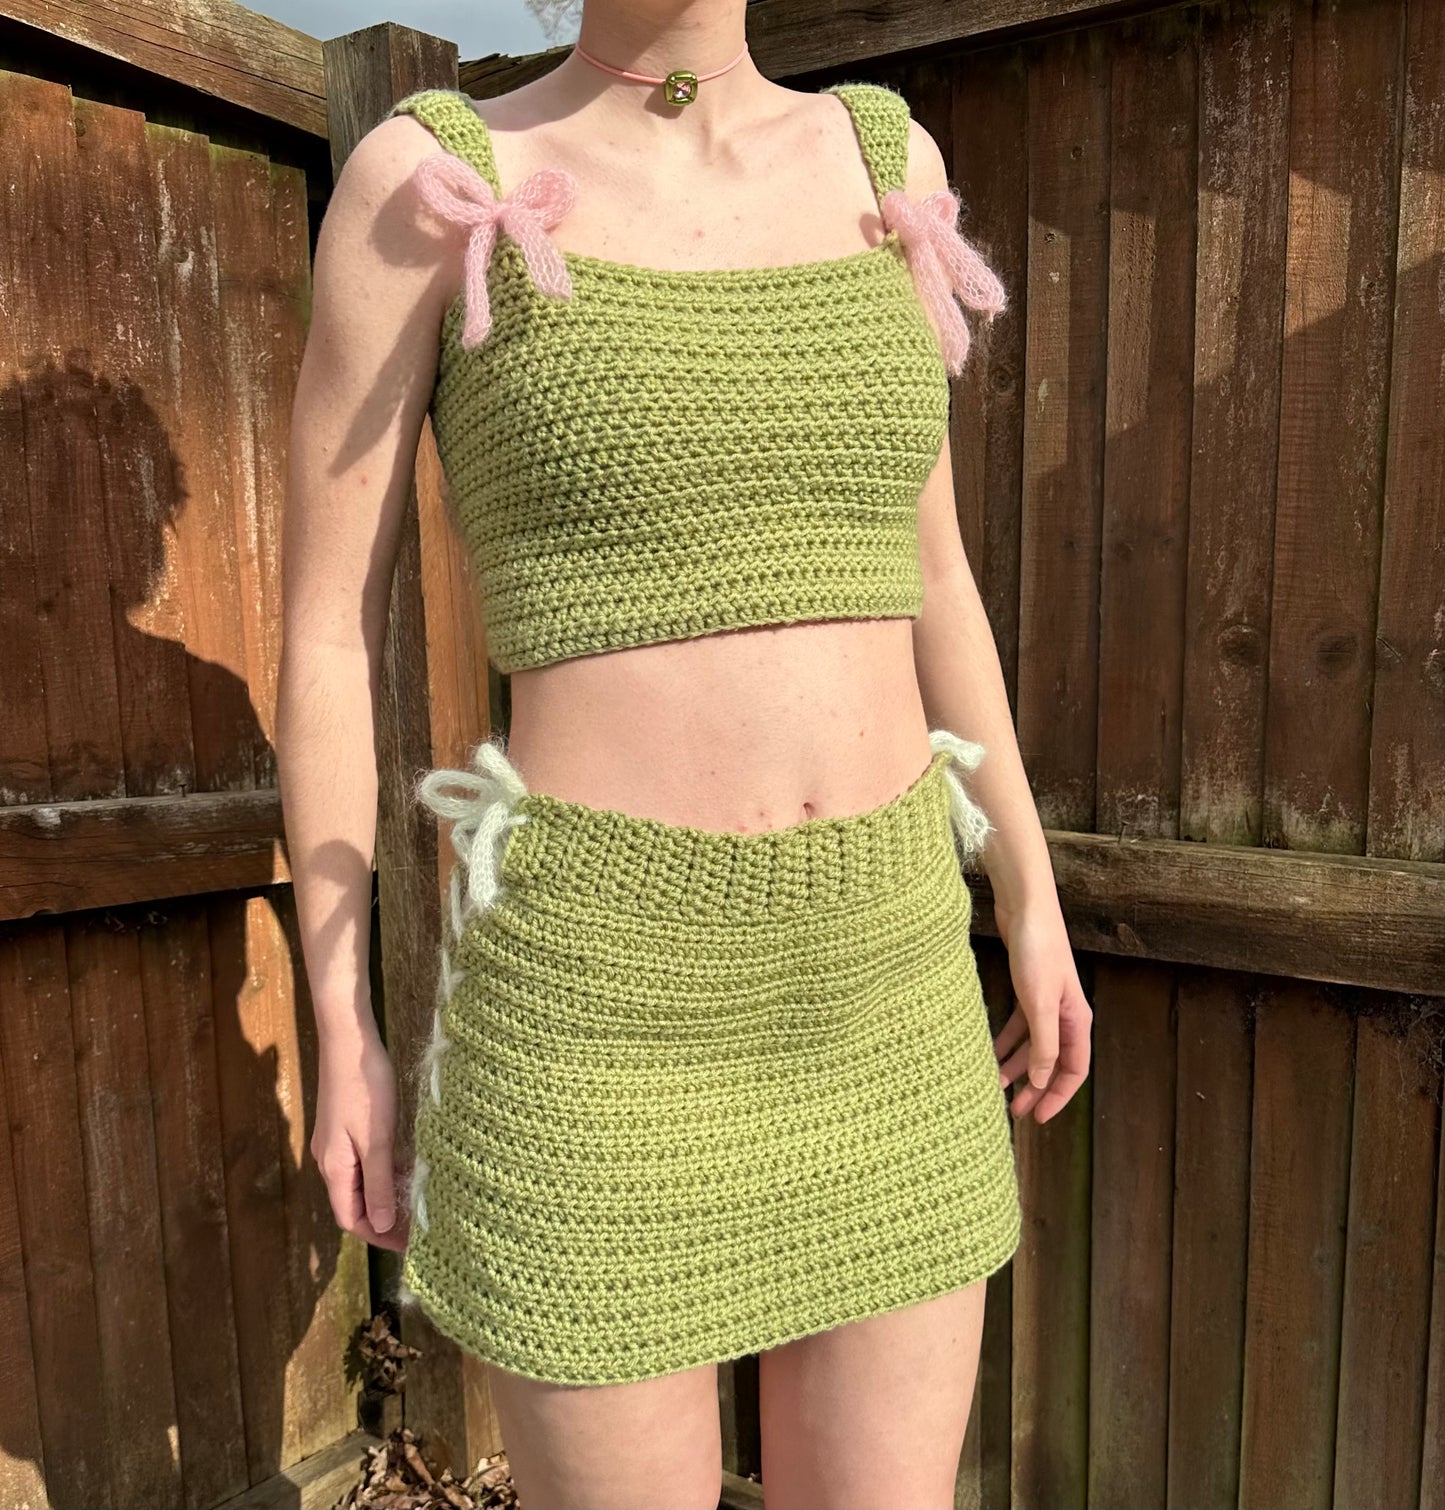 Handmade crochet coord with bow top and lace up skirt